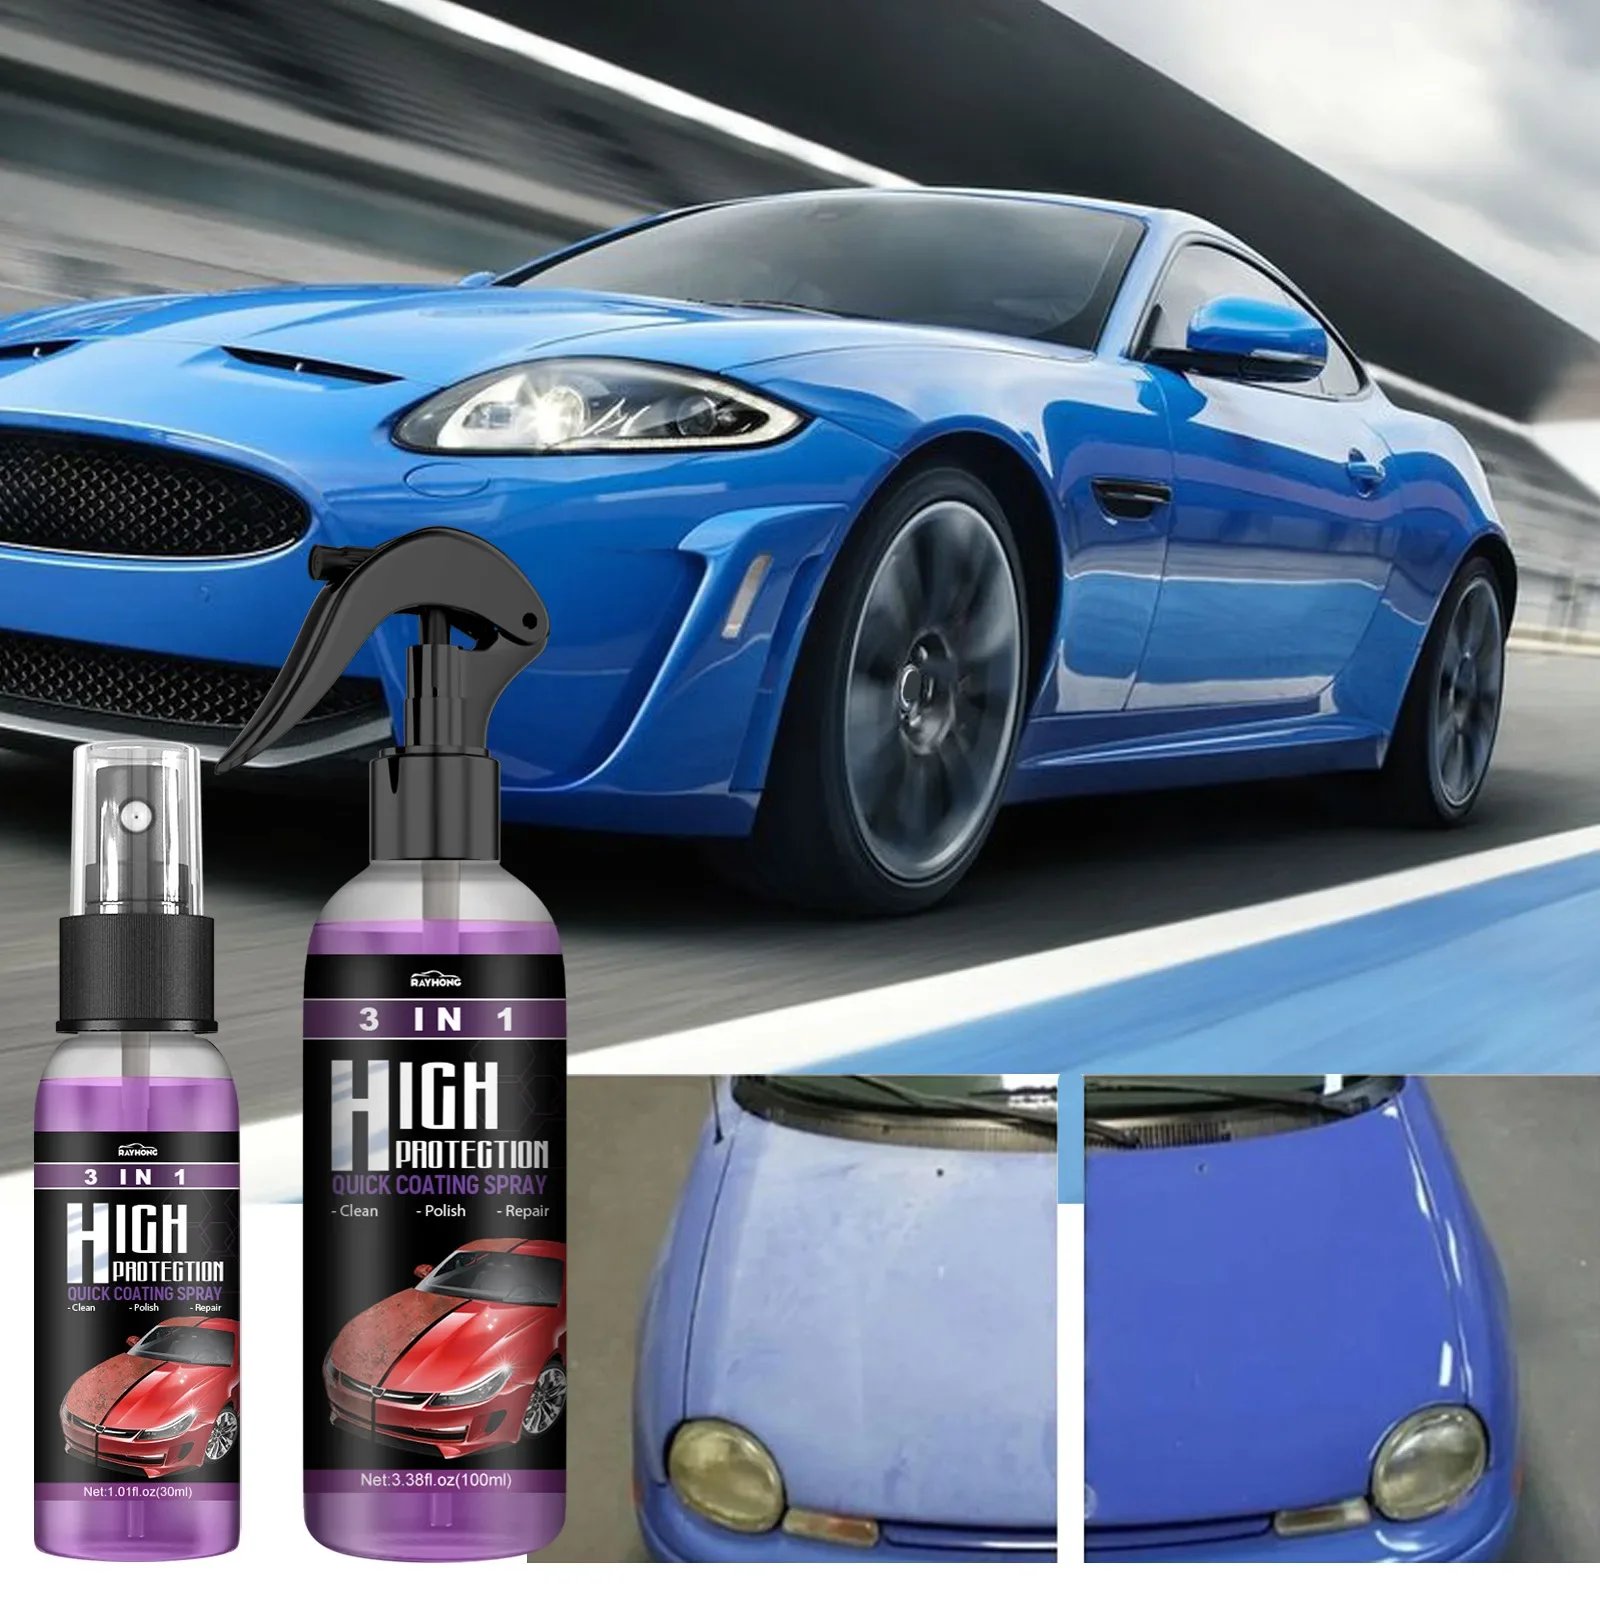 3 IN 1 Car Quick Coating Spray Products Cleaning Shield Coating Paint Repair Auto Detailing Exterior Restorer Ceramic Spray Tool